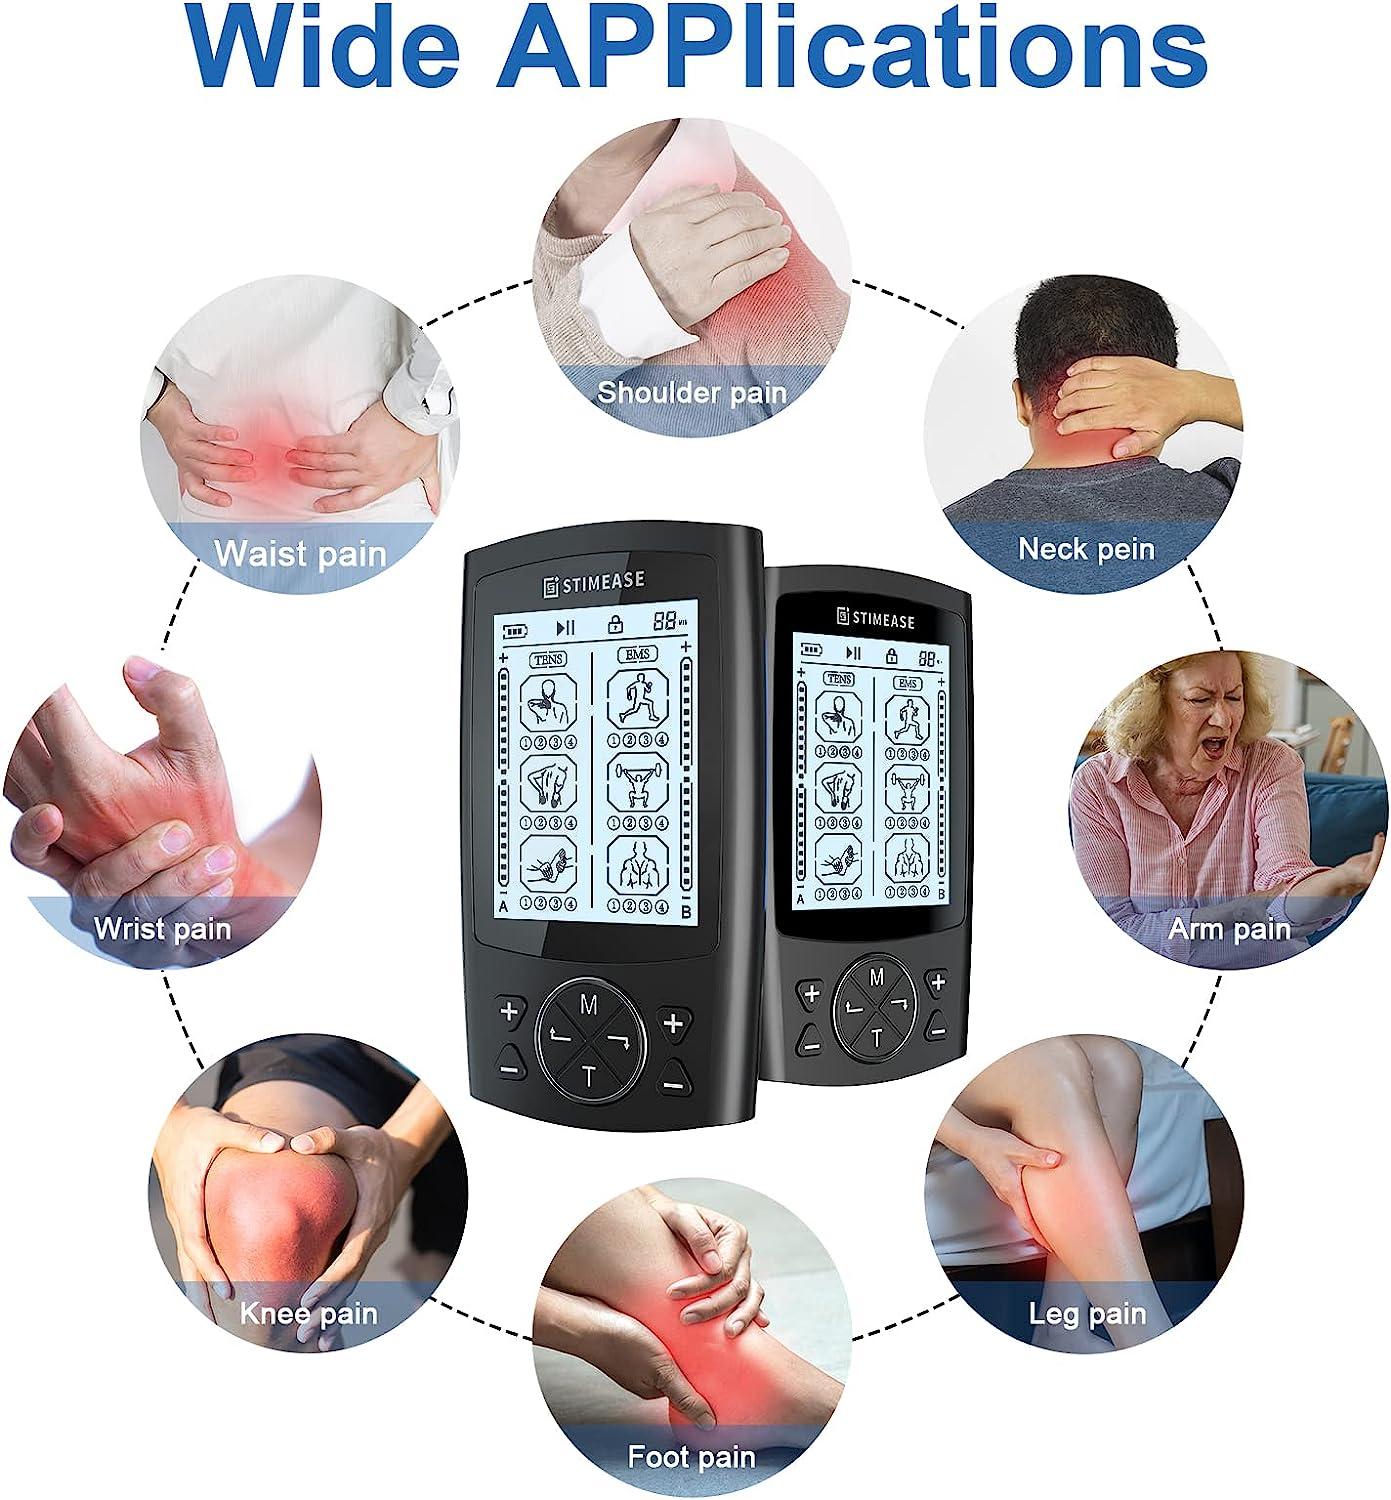 Tens Unit Electrical Stimulation EMS Digital Body Massager Muscle Relief  Therapy